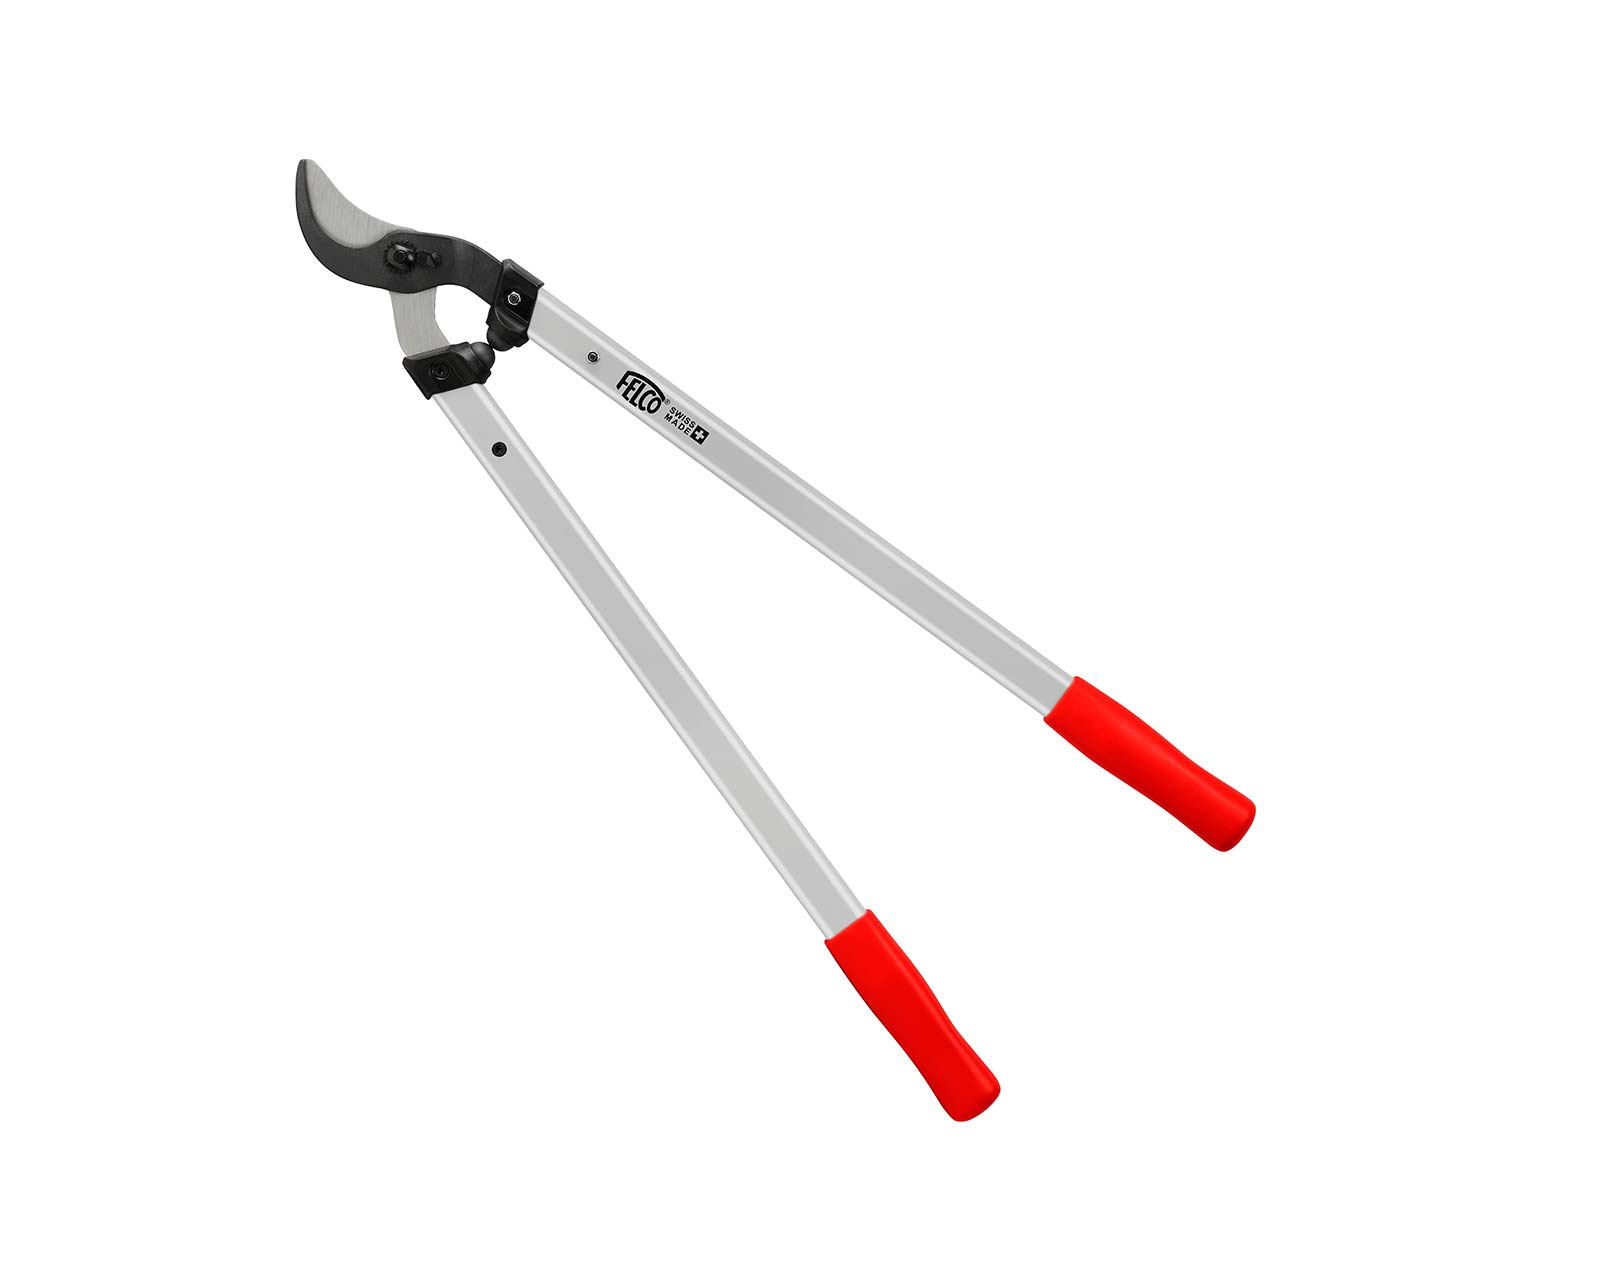 Felco 221-70 lightweight and robust loppers with a curved cutting head